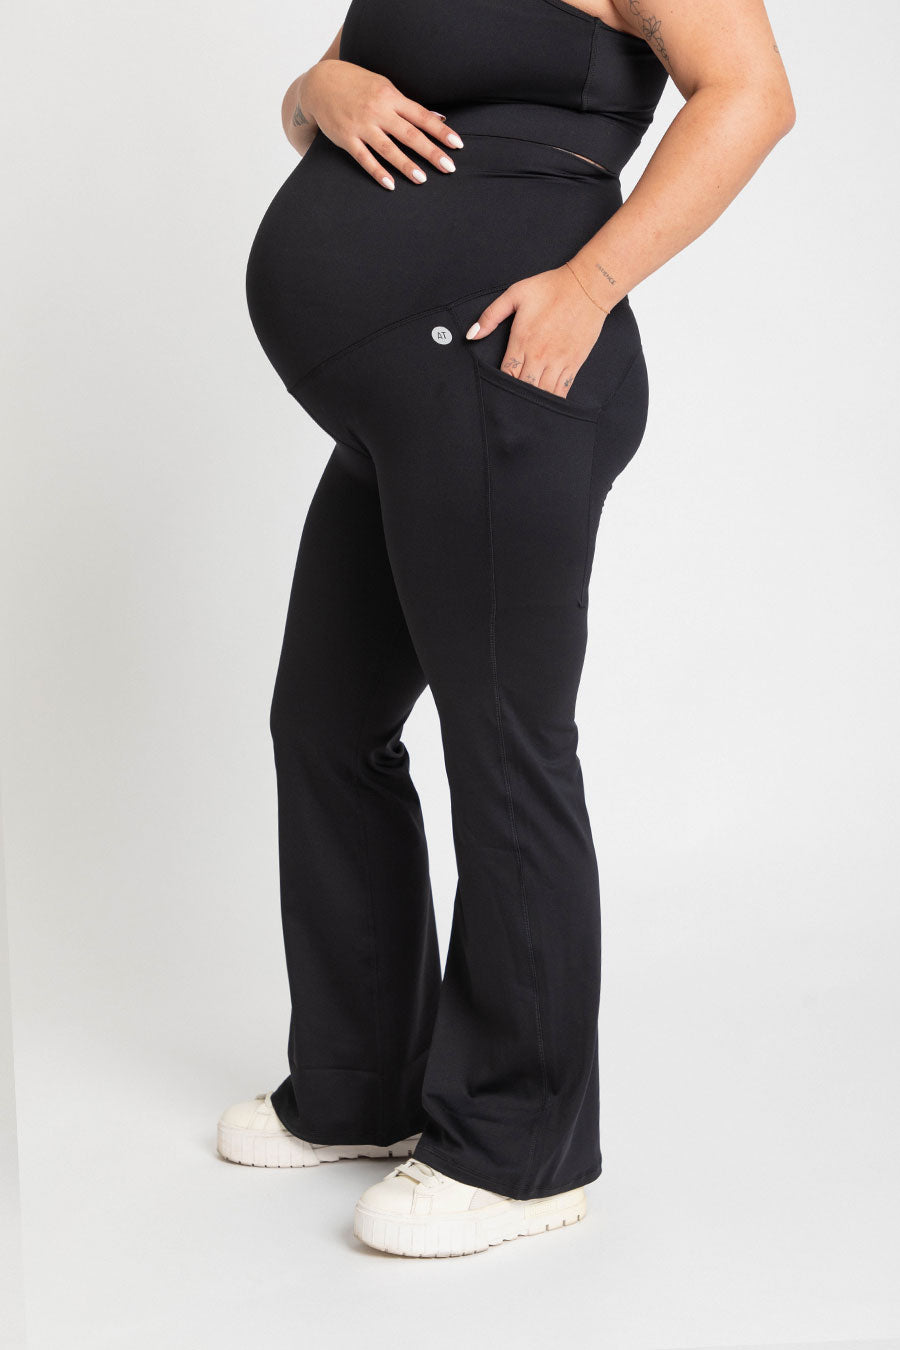 Pregnancy Pocket Full Length Flare Tight - Black from Active Truth™
